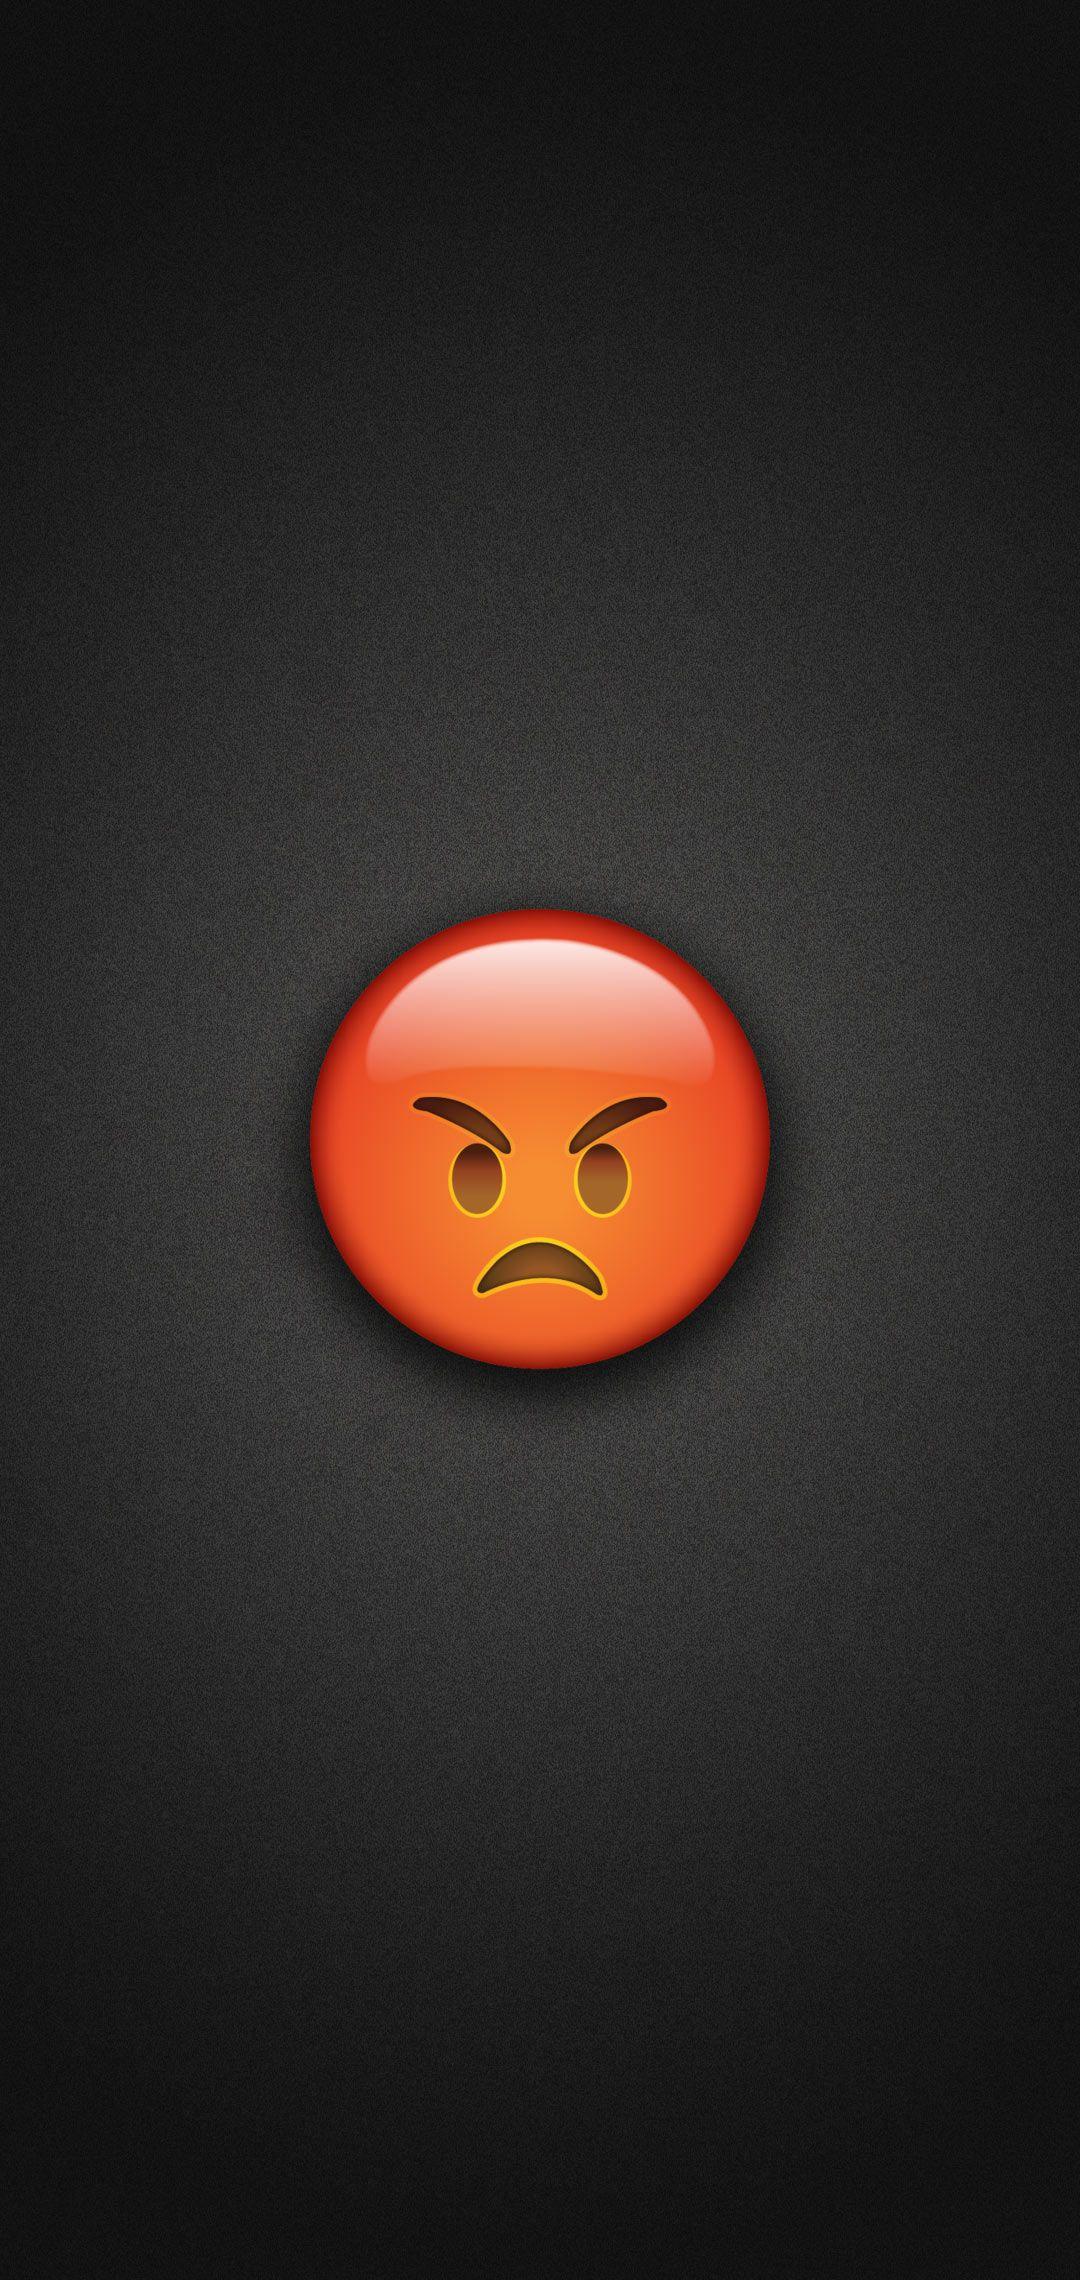 Angry Emojis Wallpapers - Top Free Angry Emojis Backgrounds ...